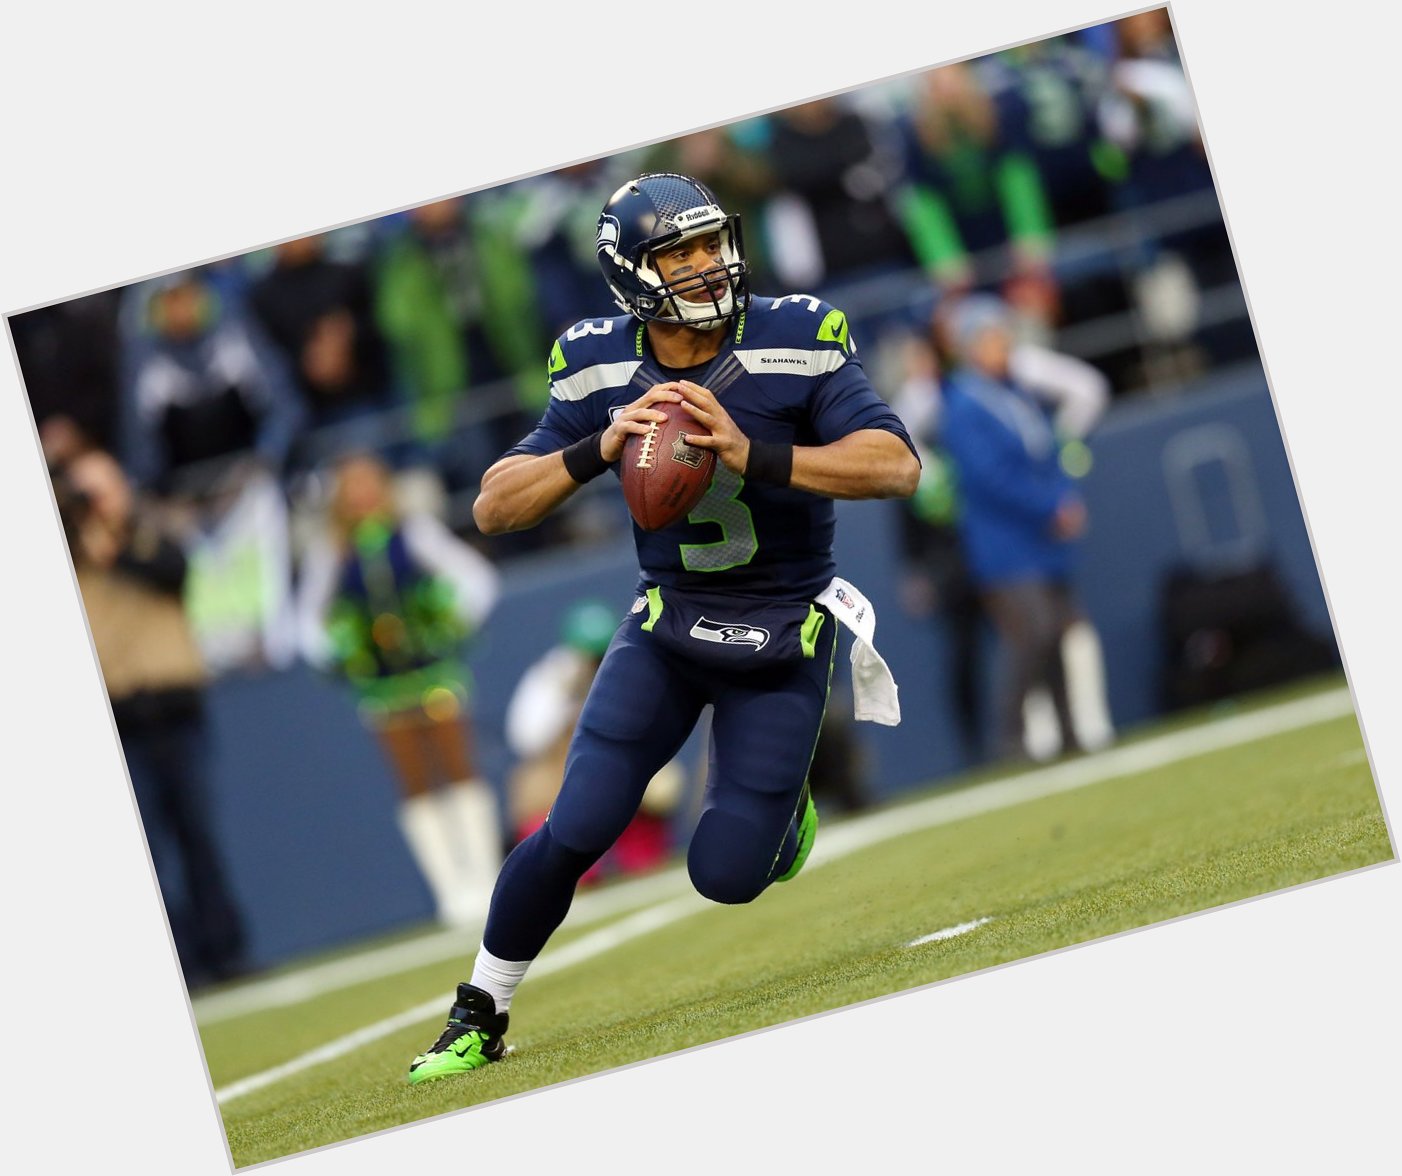 Happy Birthday to Russell Wilson, who turns 27 today! 